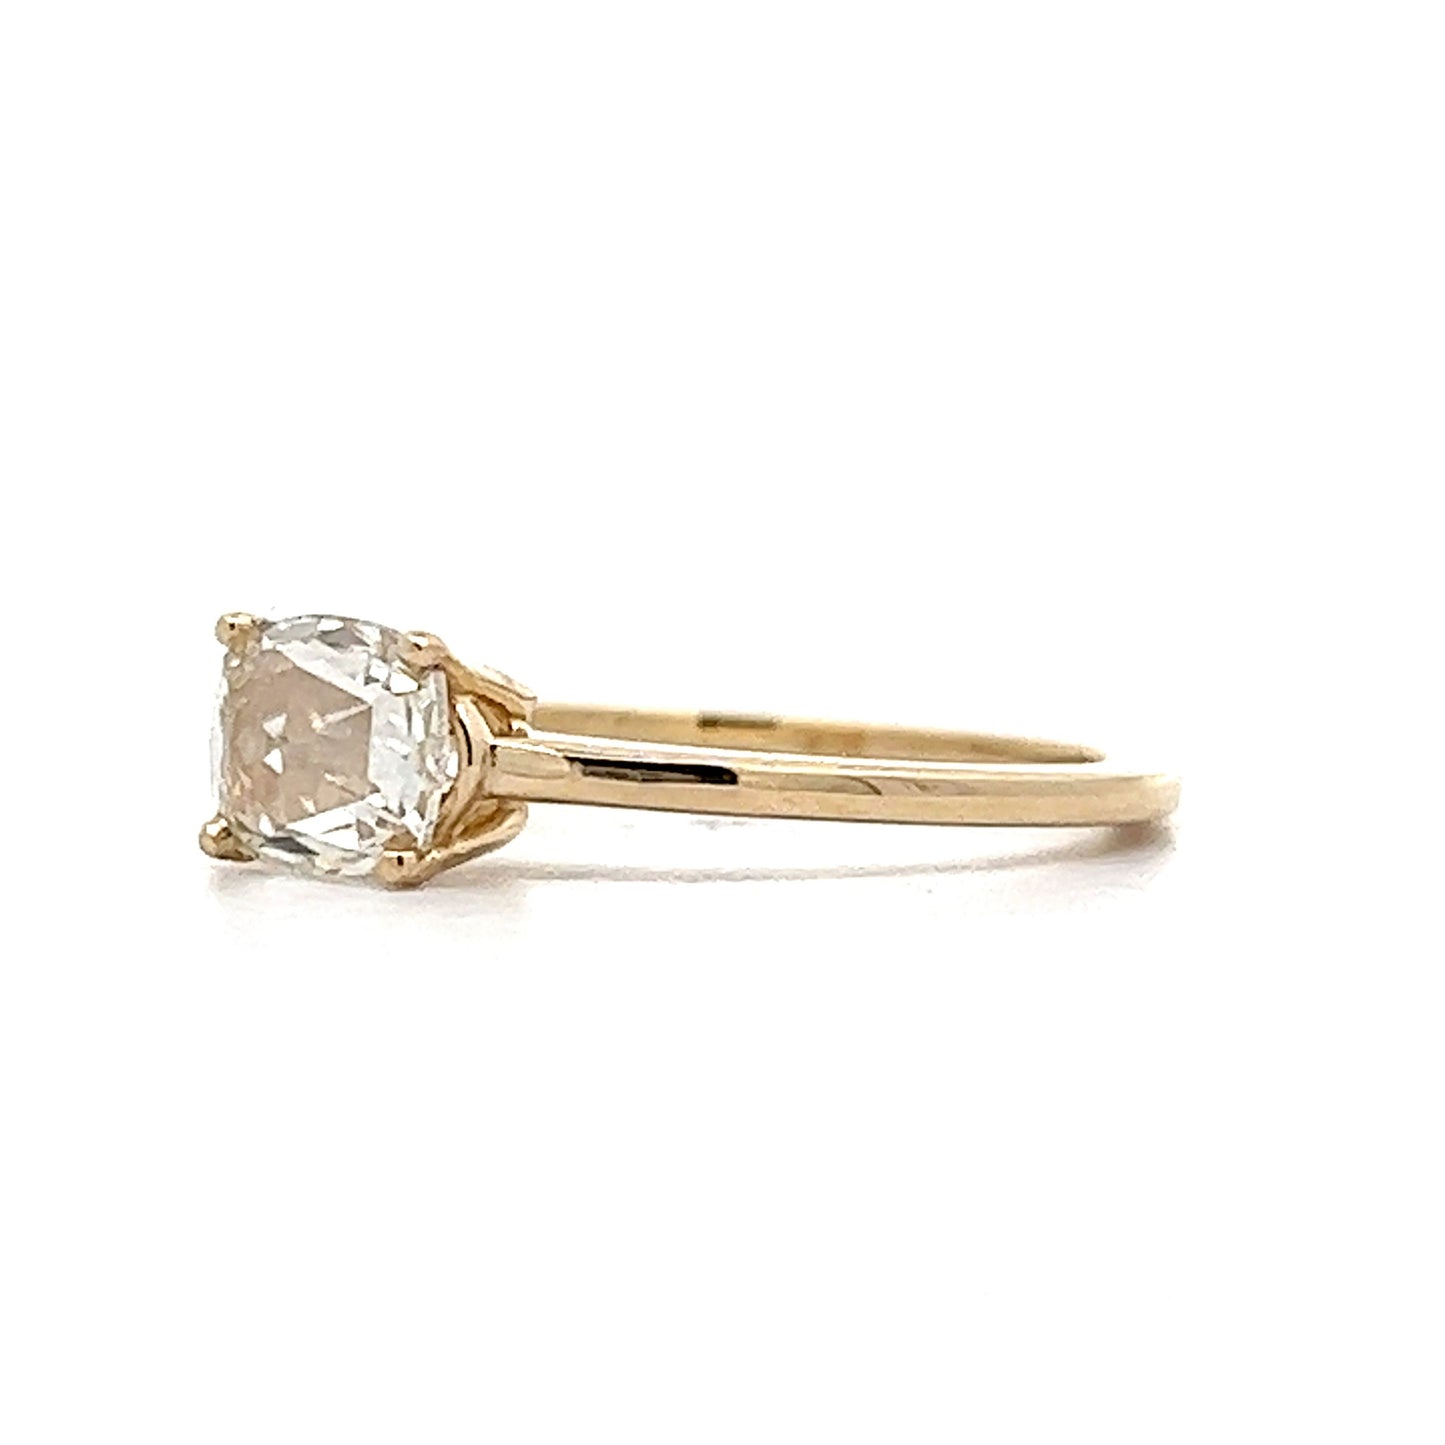 .82 Rose Cut Diamond Solitaire Engagement Ring in Yellow Gold